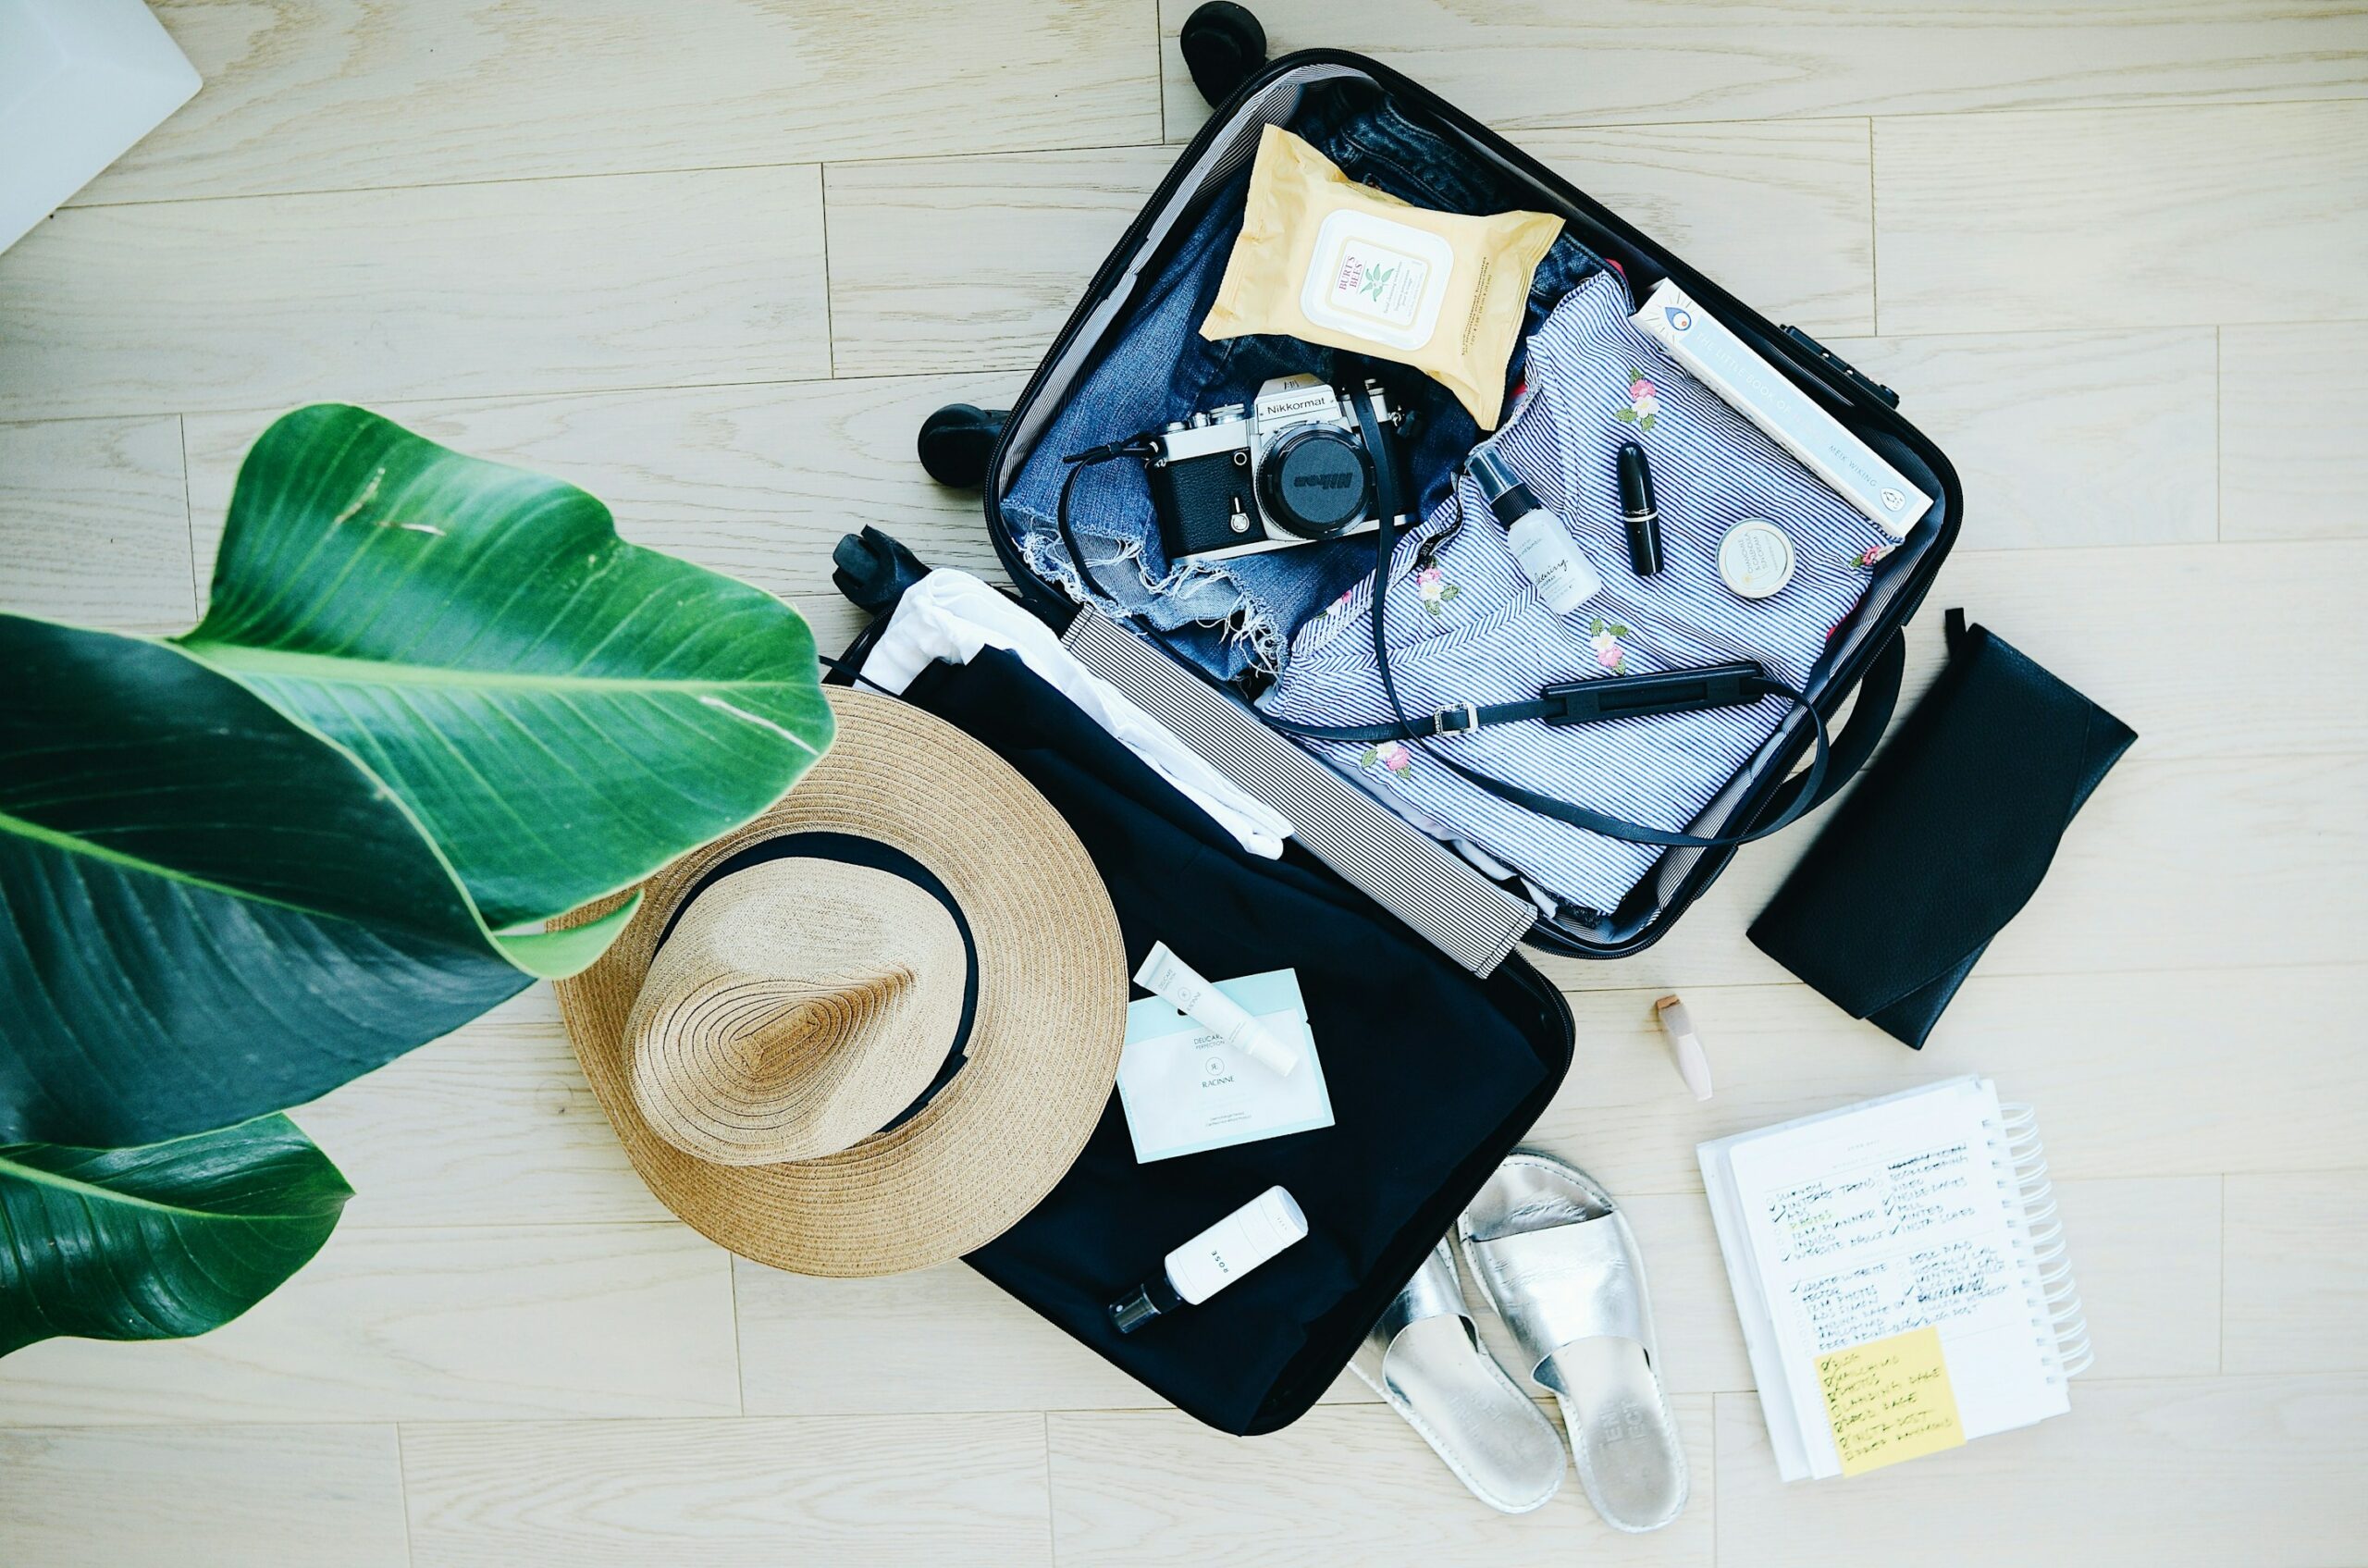 Some things to pack when going on vacation.